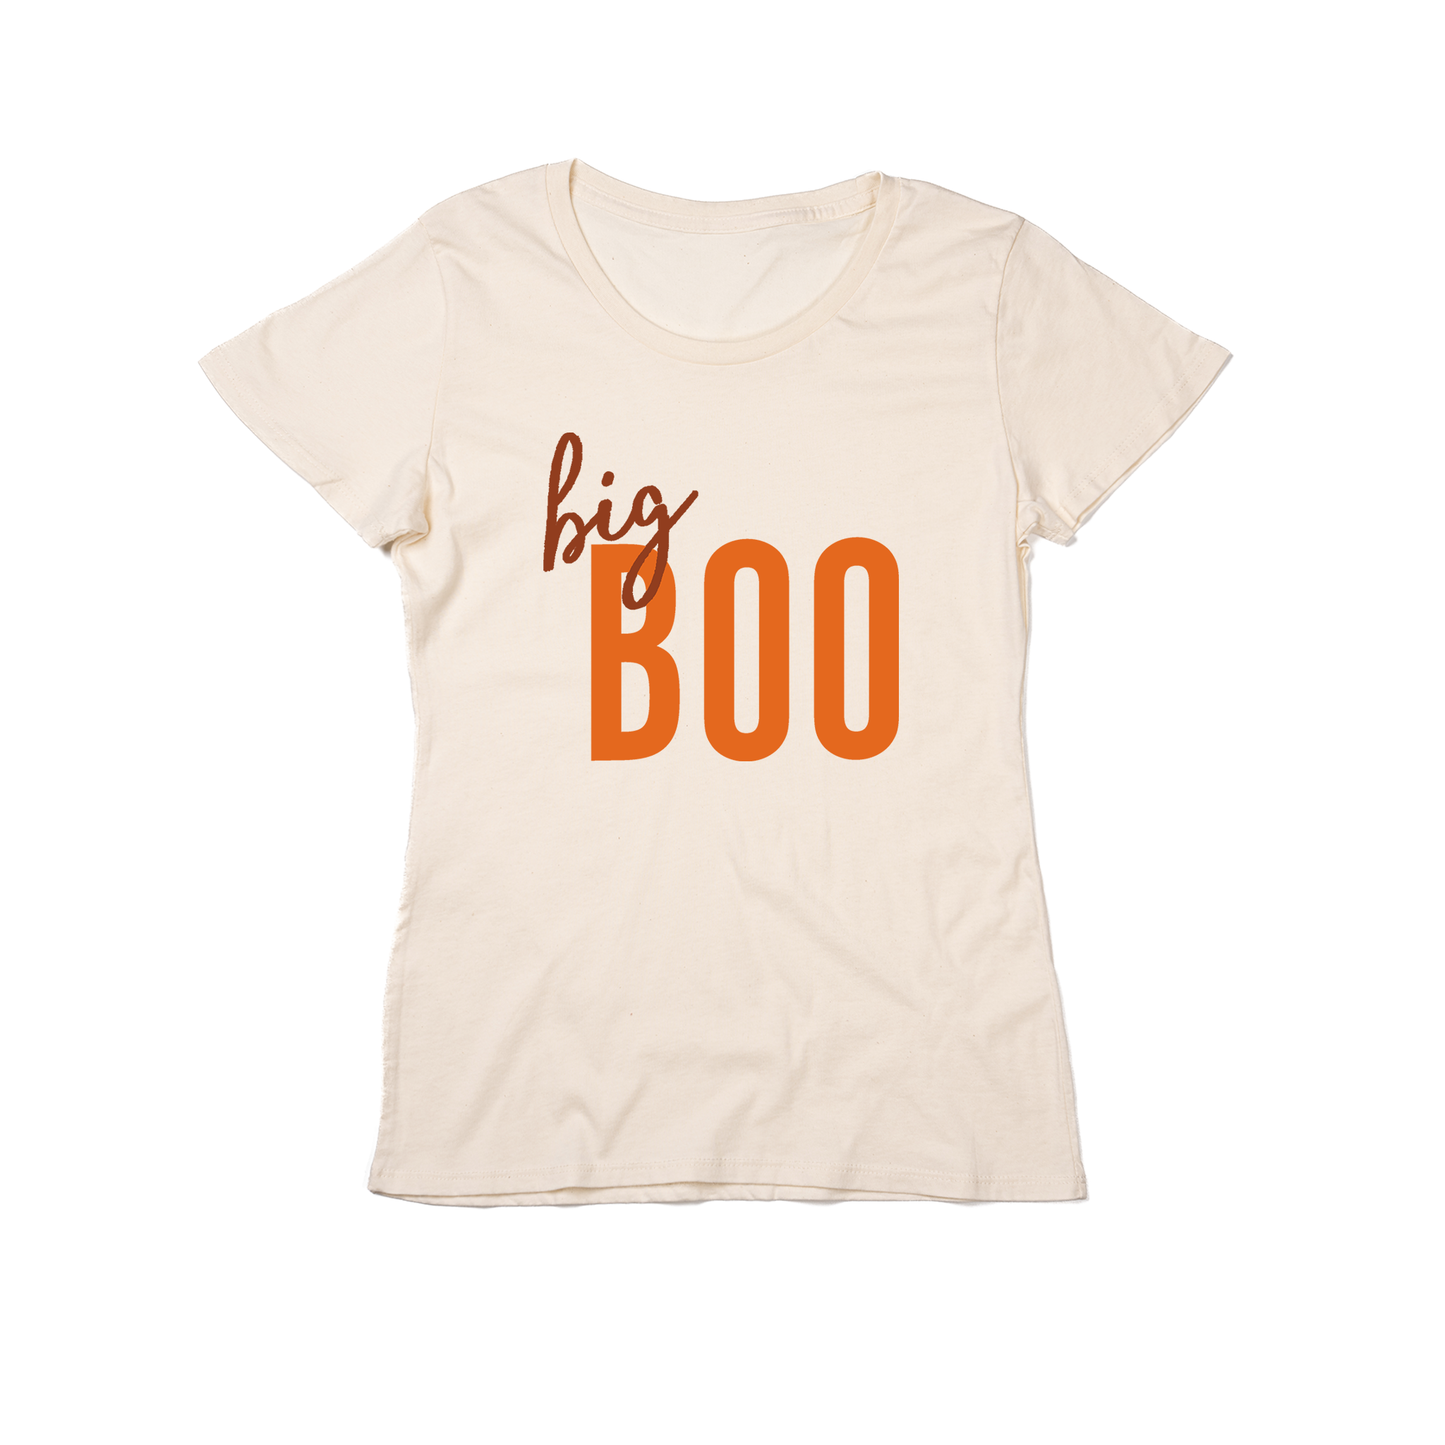 Big Boo - Women's Fitted Tee (Natural)